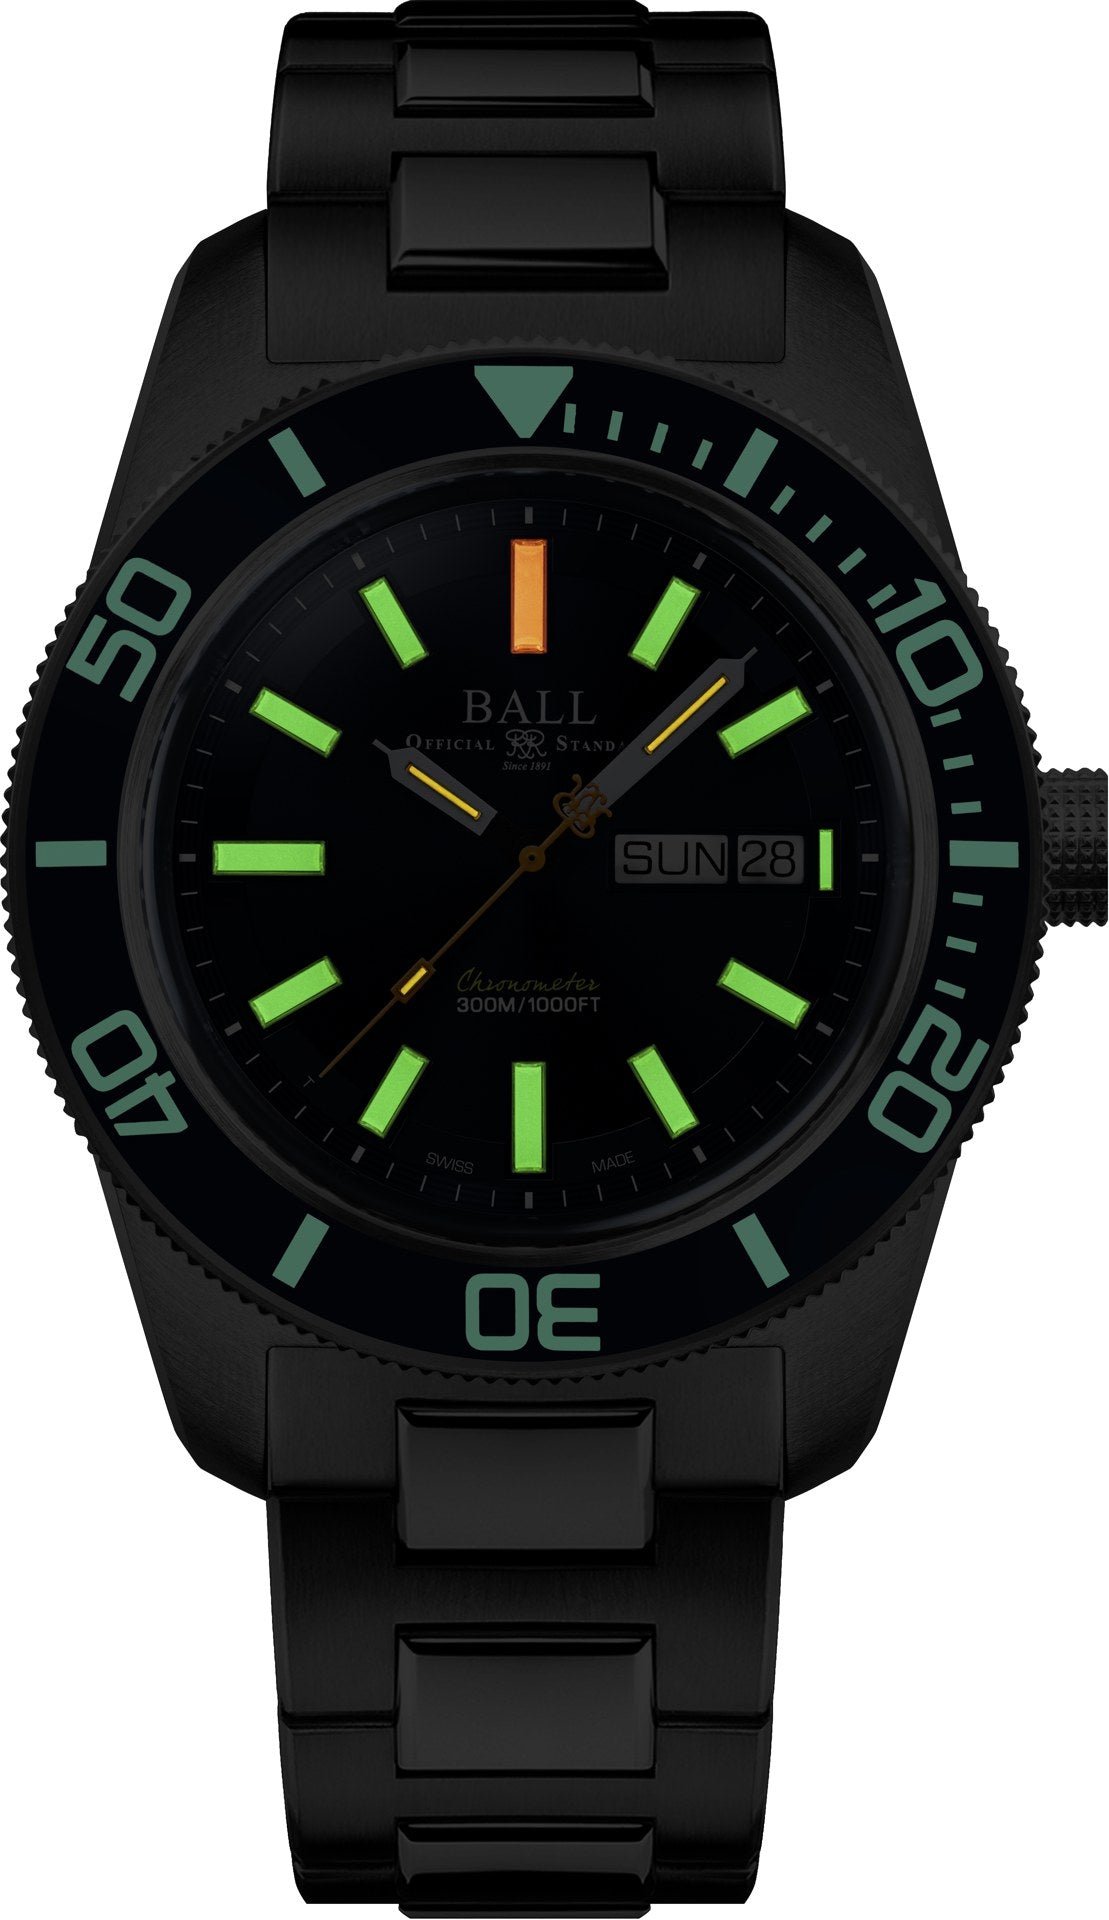 BALL Engineer Master II Skindiver Heritage | DM3308A-S1C-BE